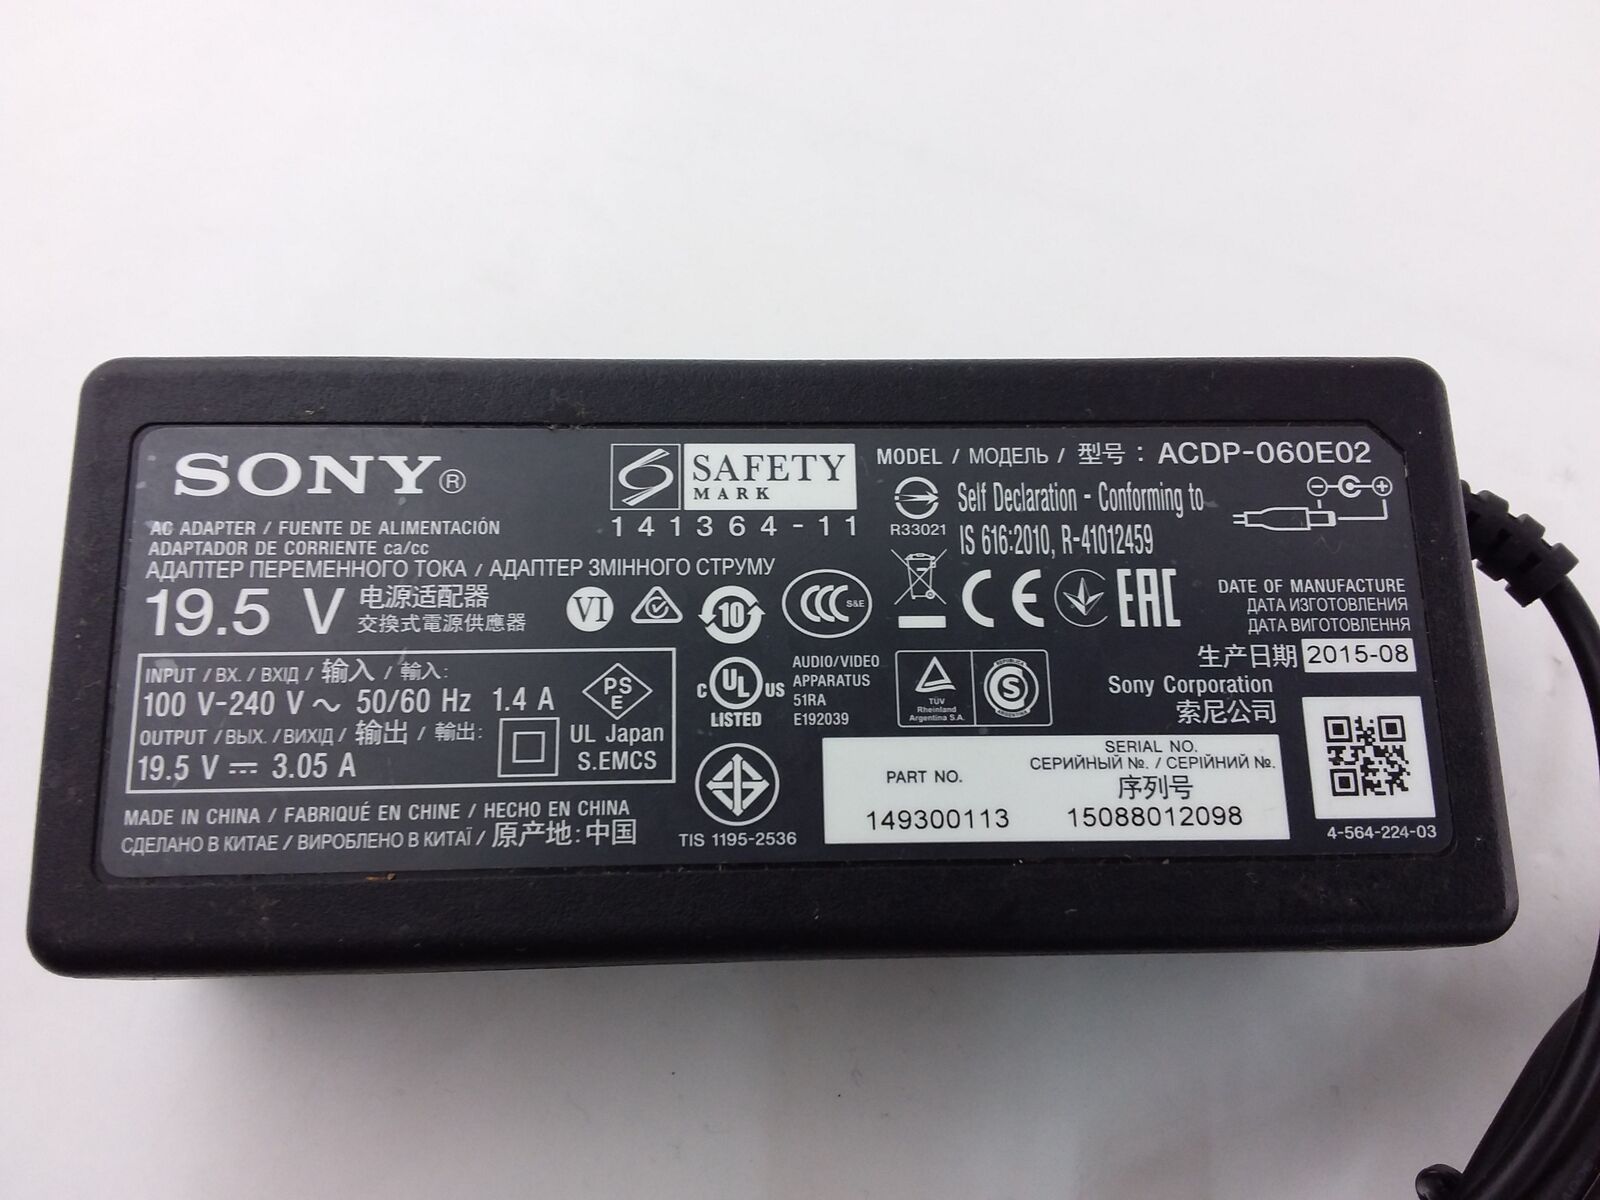 Original Sony ACDP-060E02 TV Power Adapter Cable Cord Box Brand: Sony MPN: ACDP-060E02-USED Type